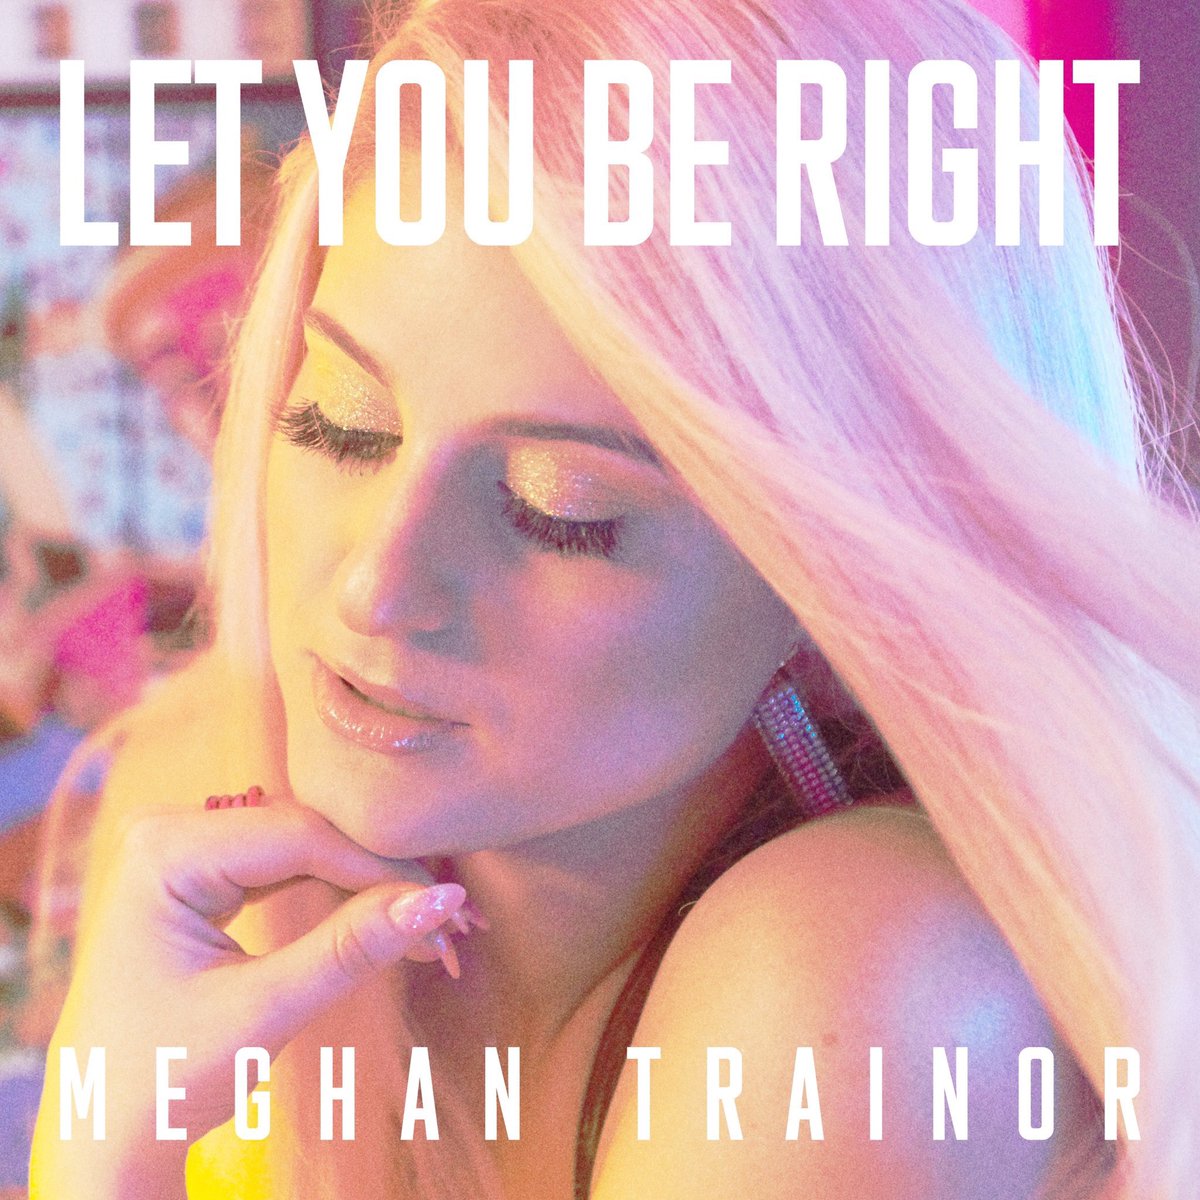 Let You Be Right | The Meghan Trainor Wiki | FANDOM powered by Wikia1200 x 1200